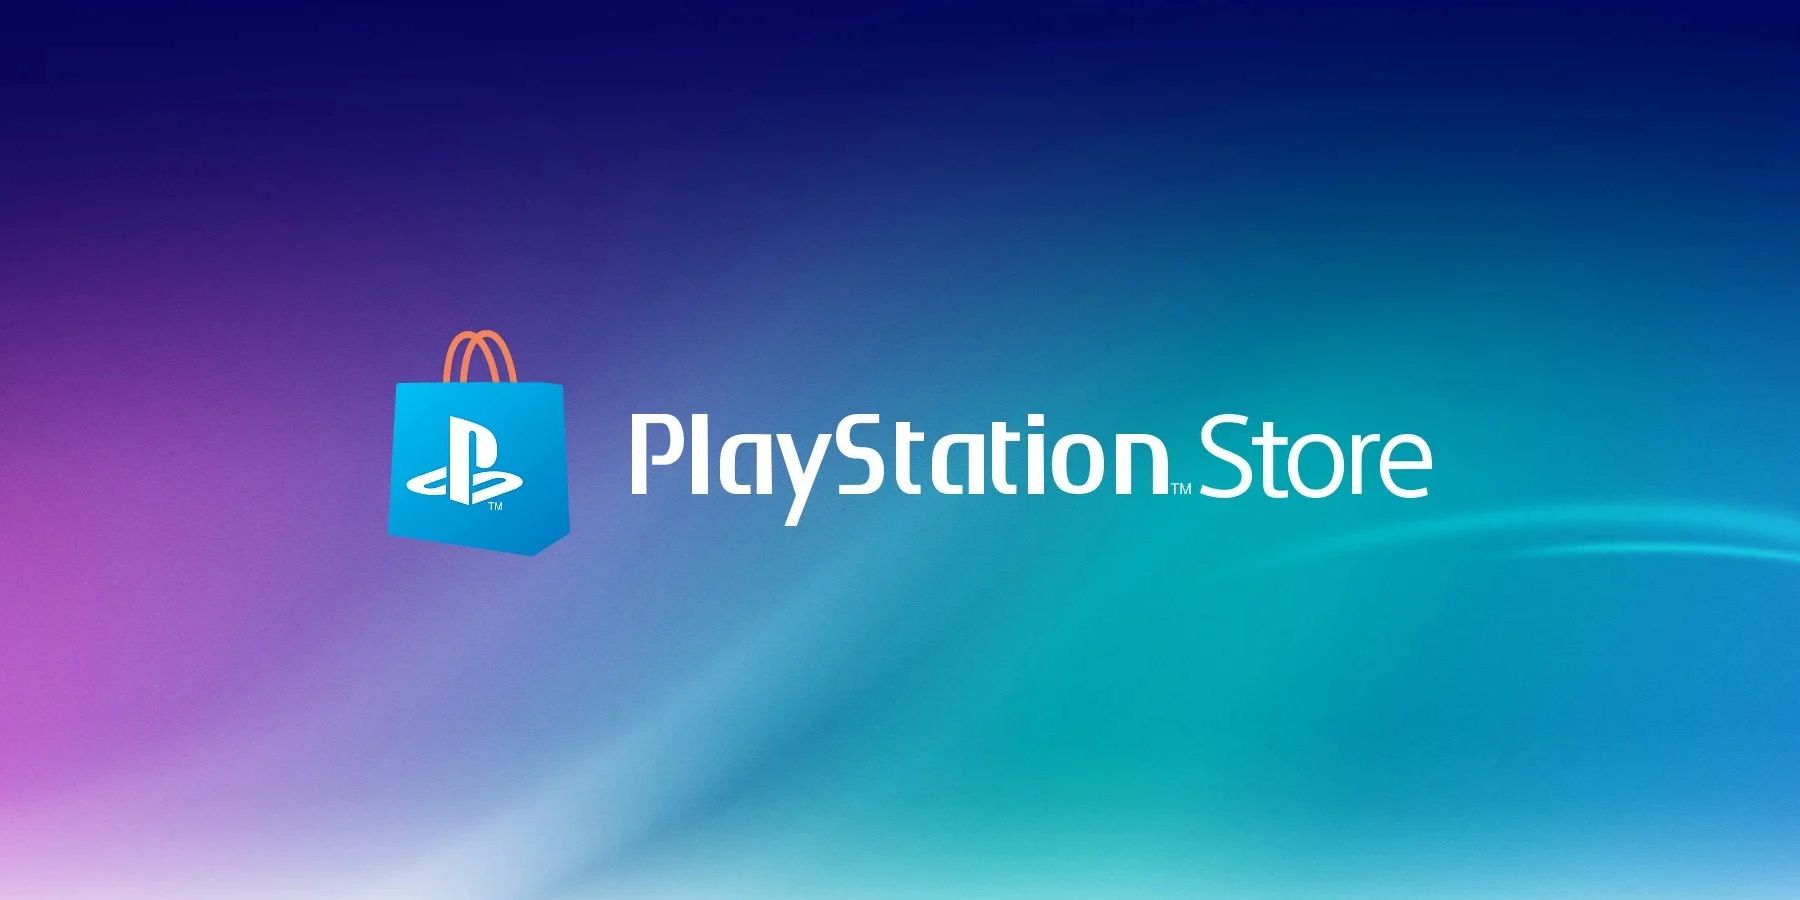 playstation store title and logo image